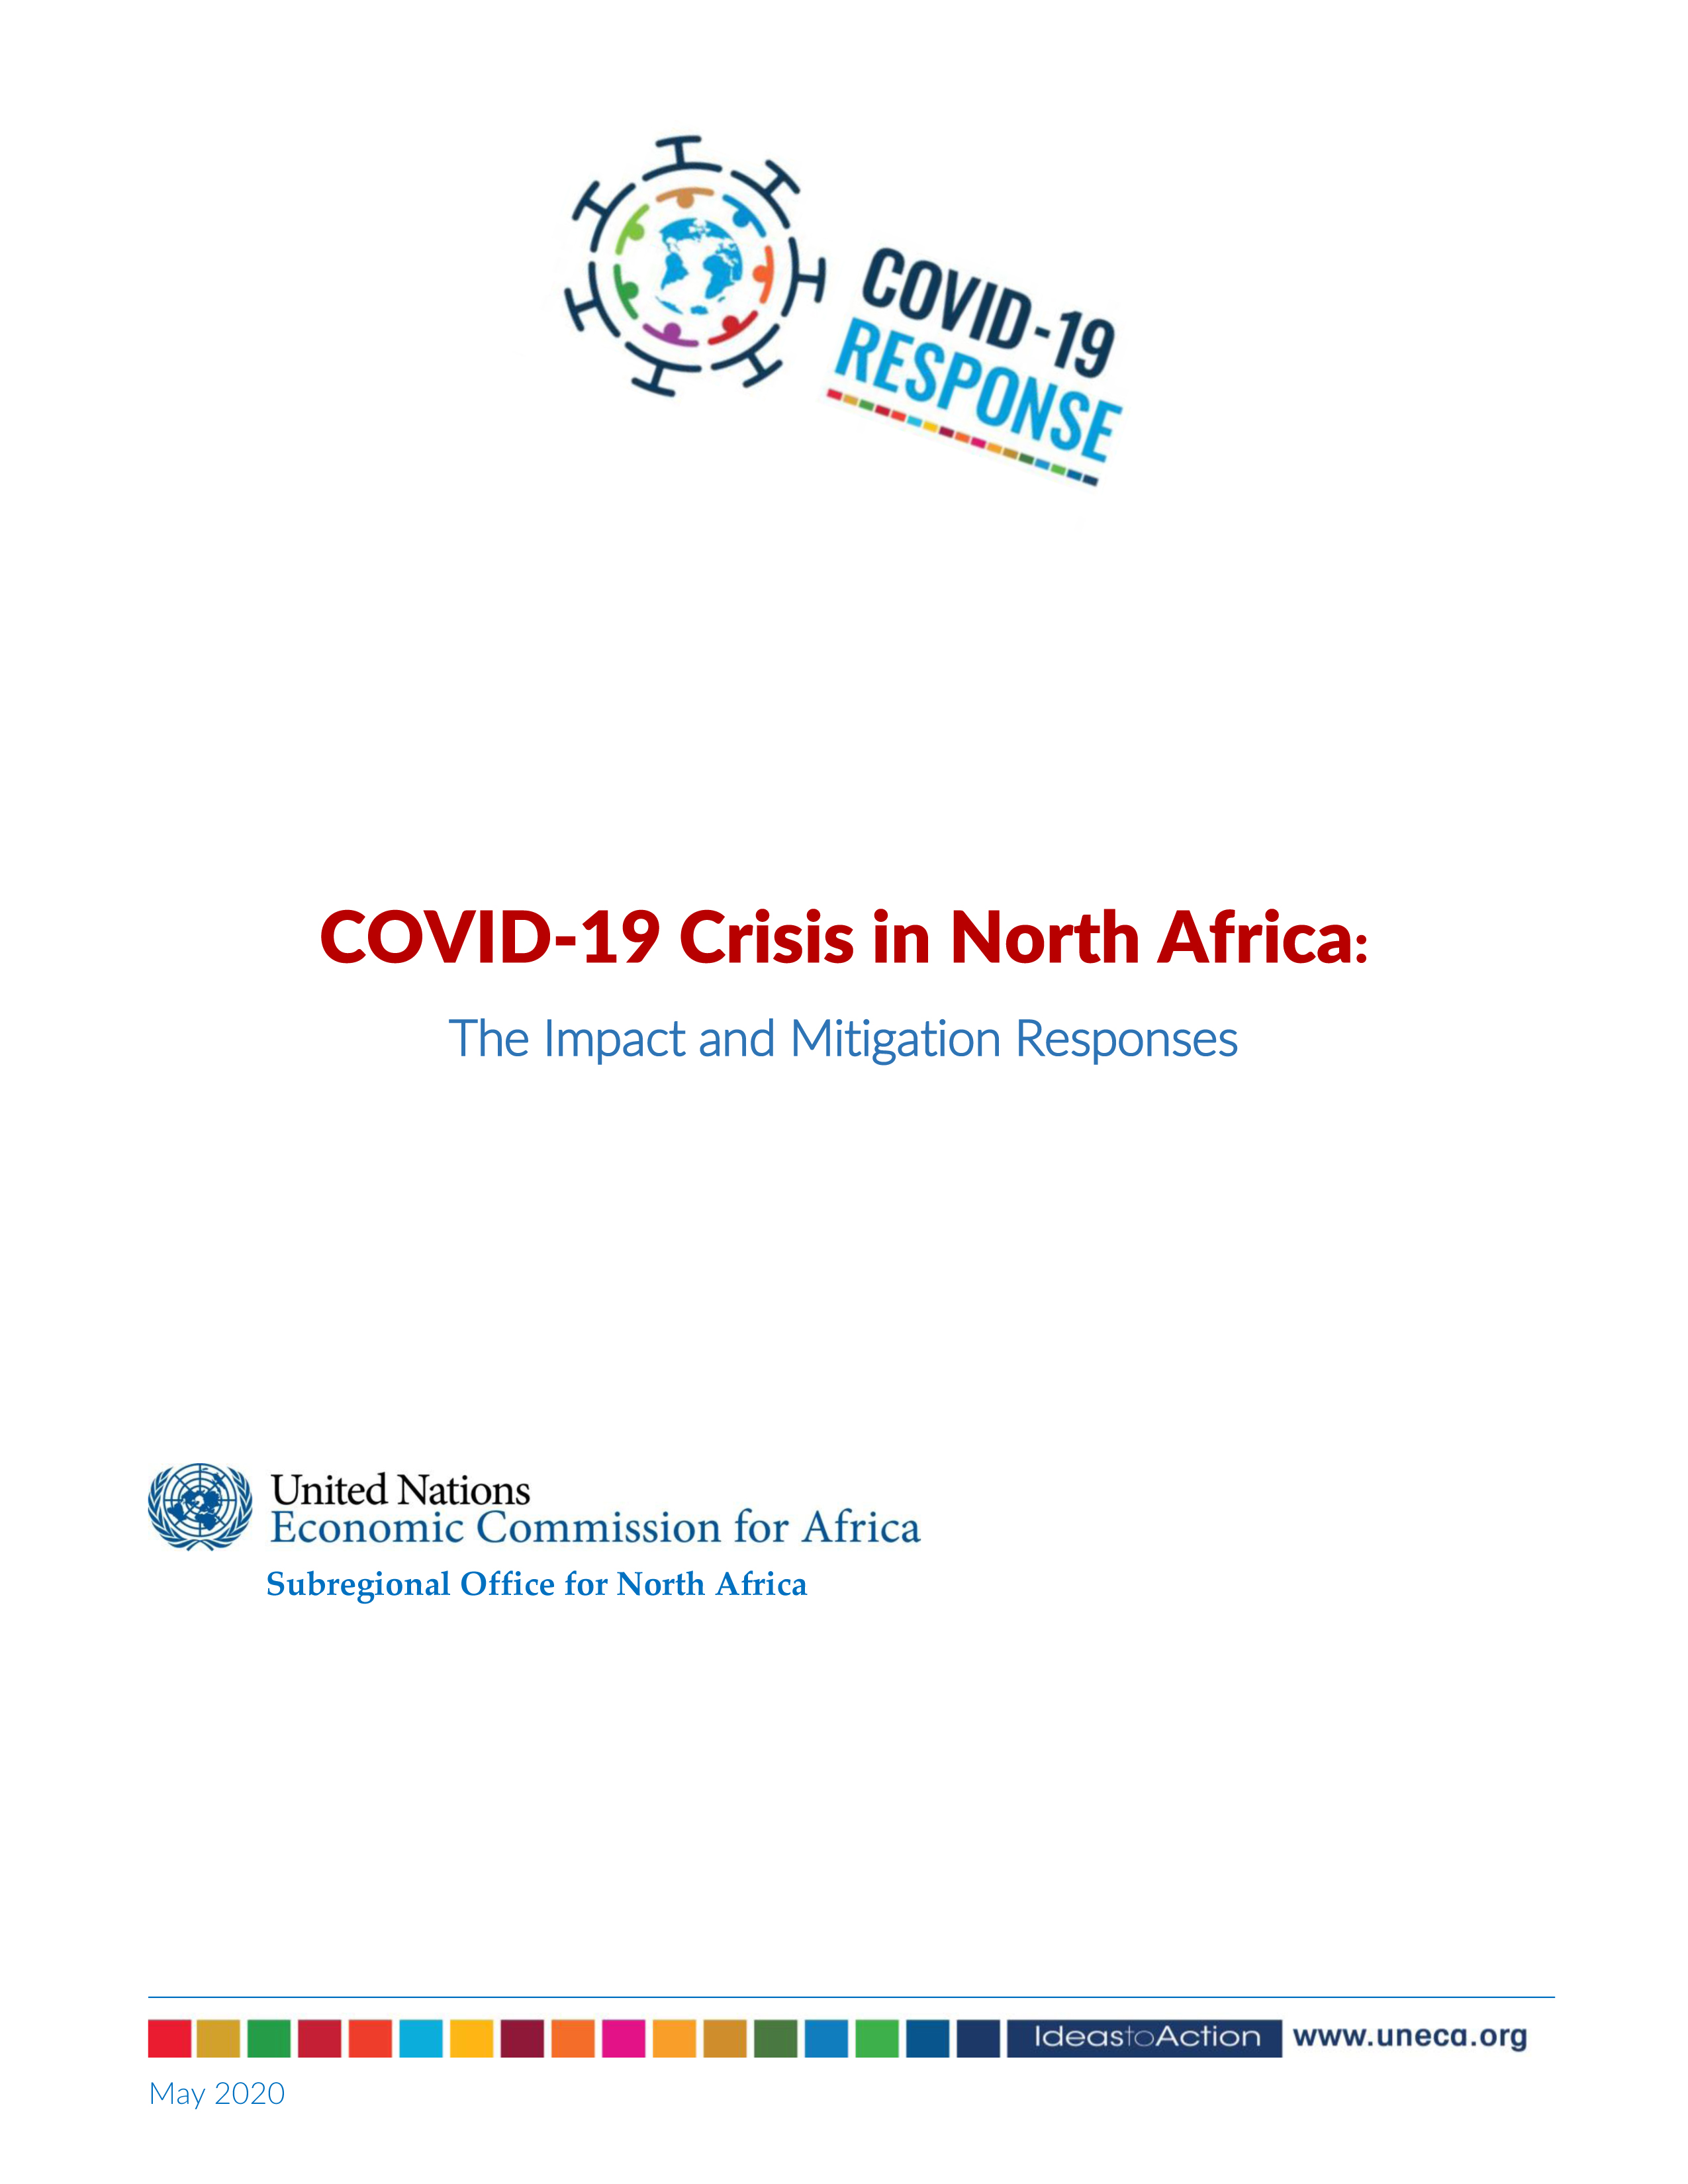 image of COVID-19 Crisis in North Africa